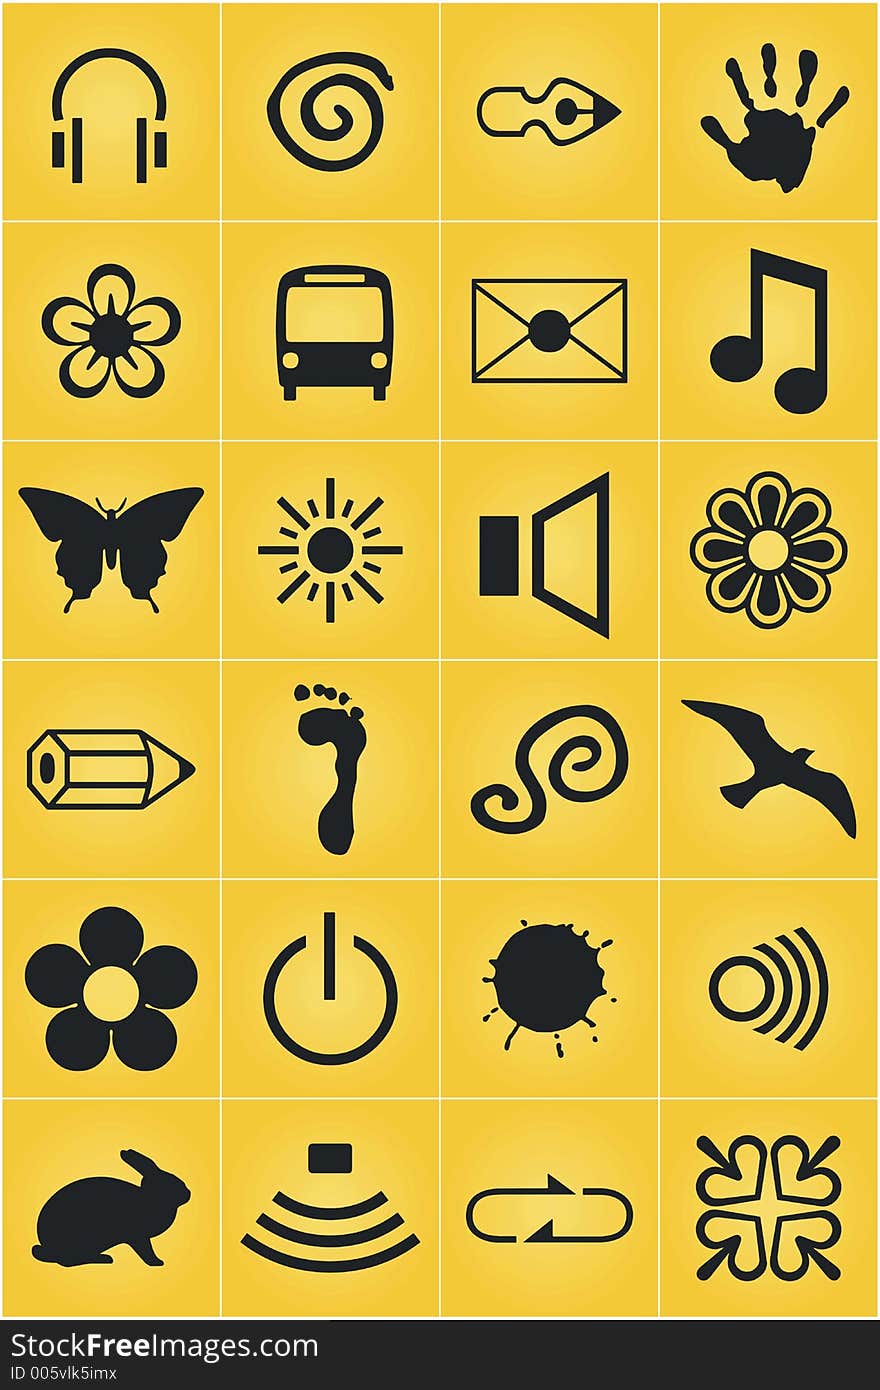 A set of signs and icons on yellow background.